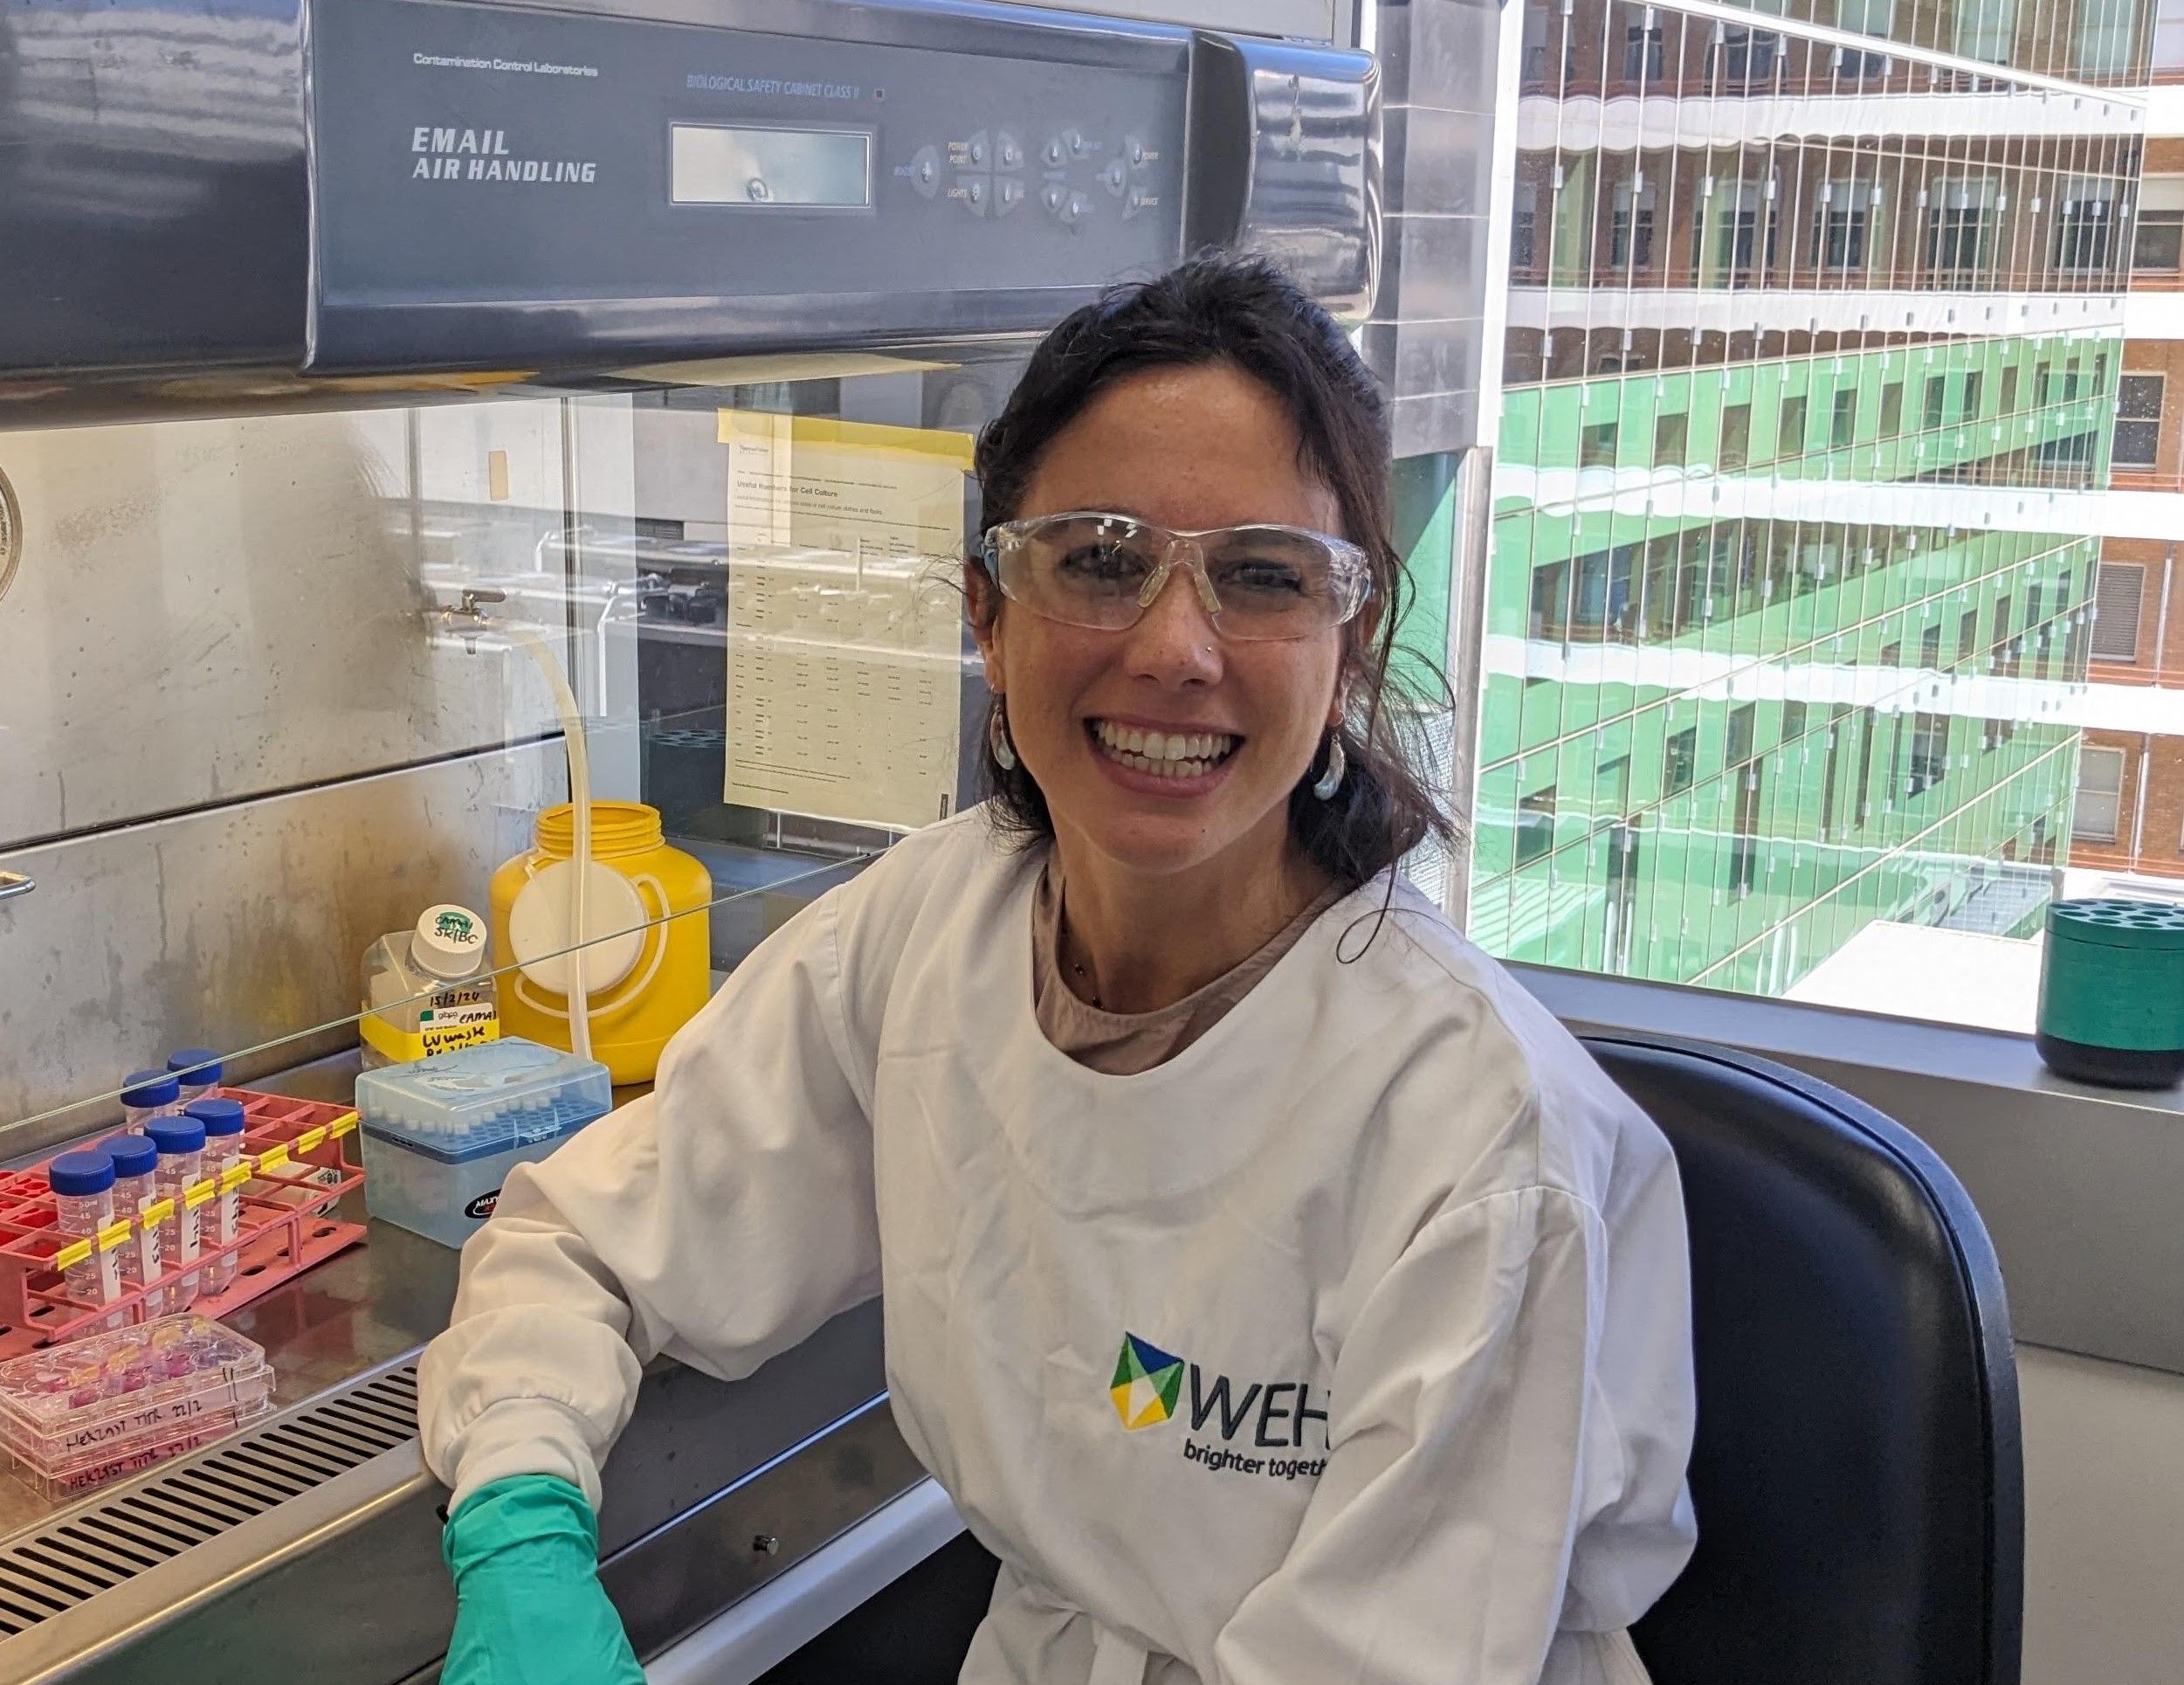 Rosa Pascual Domingo from Vinaròs makes progress in breast cancer research from WEHI, in Melbourne – Vinaròs News